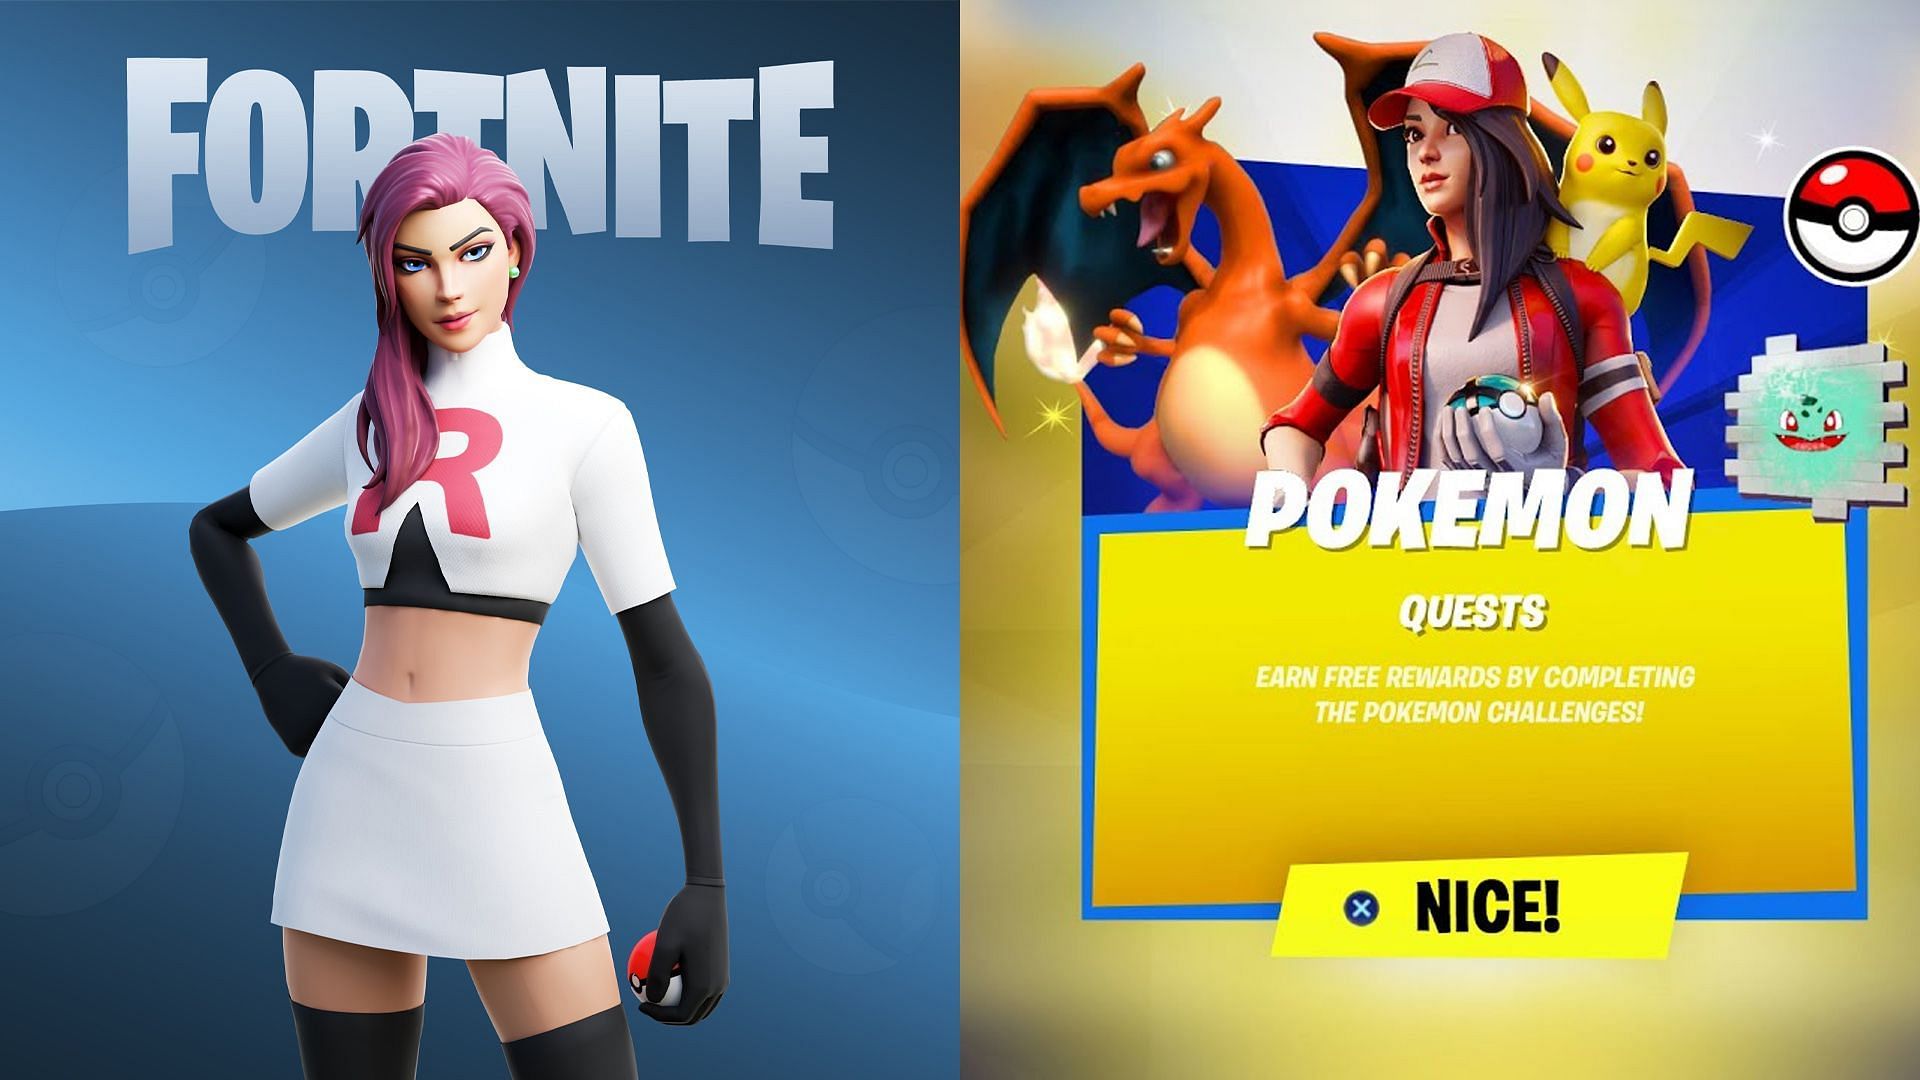 Fortnite x Pokemon collab details allegedly leak ahead of time